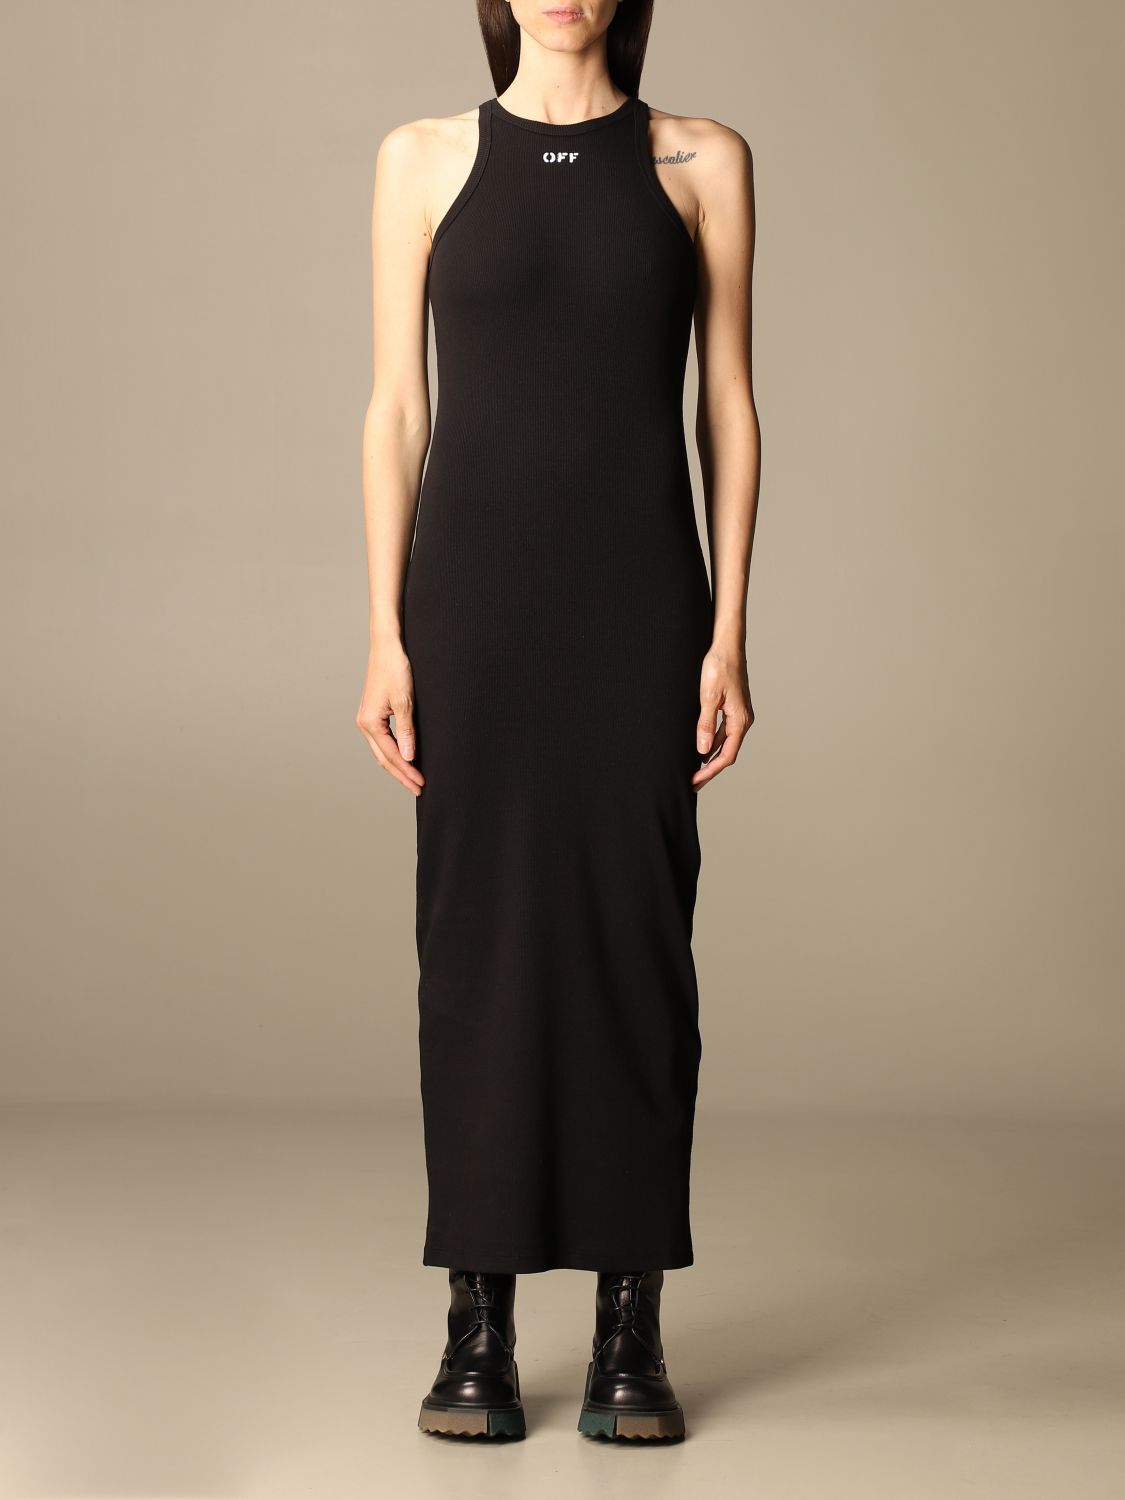 OFF-WHITE: Off White long dress in cotton knit - Black | Off-White